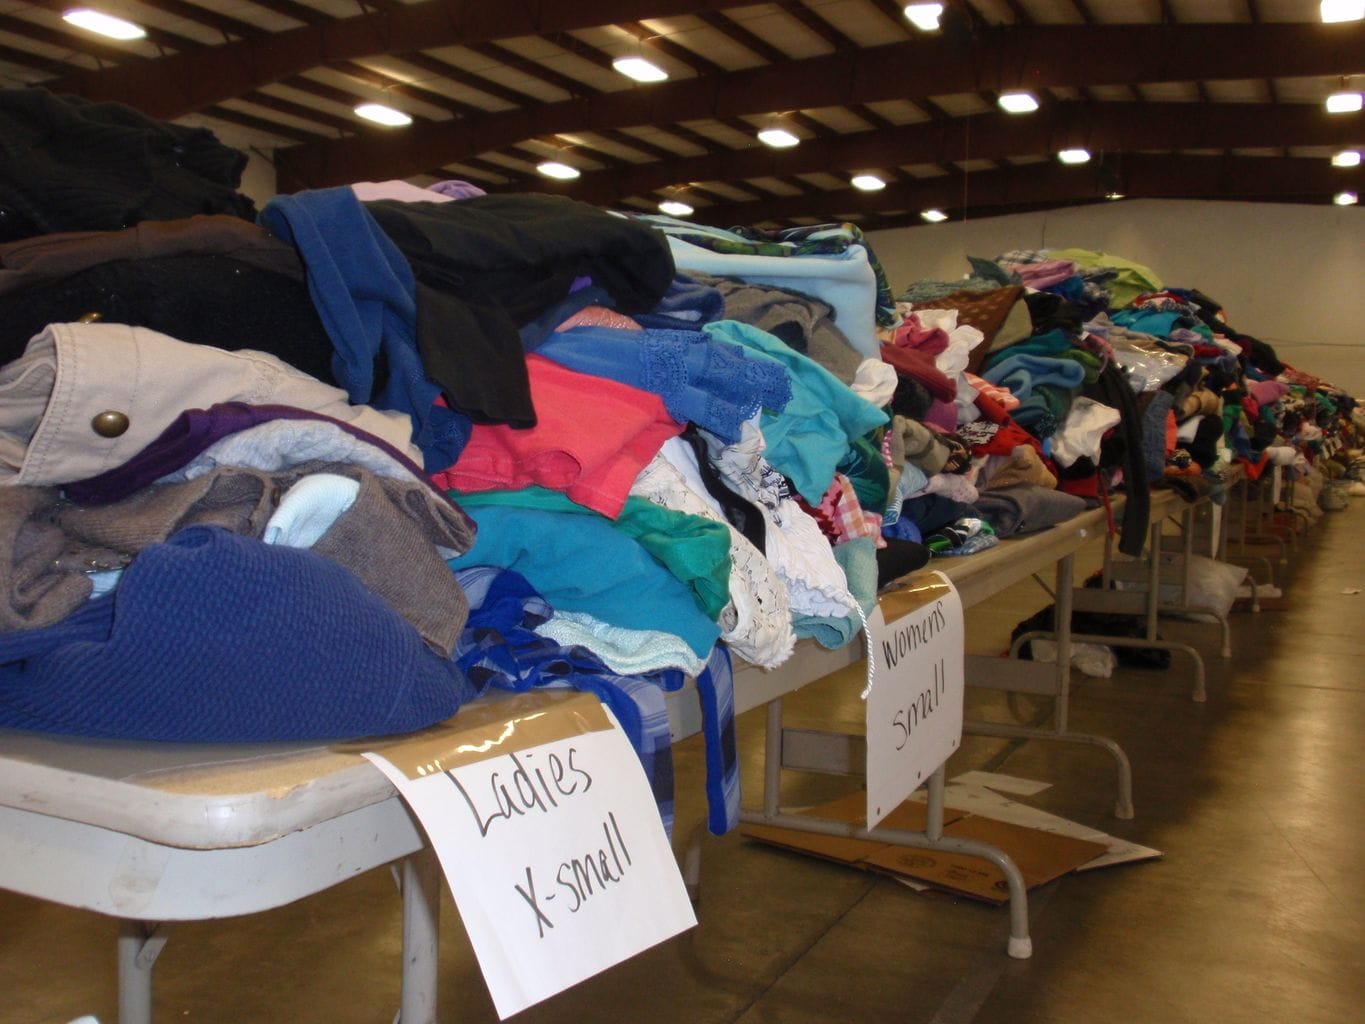 Photo including various clothing items stacked/piled on a table.